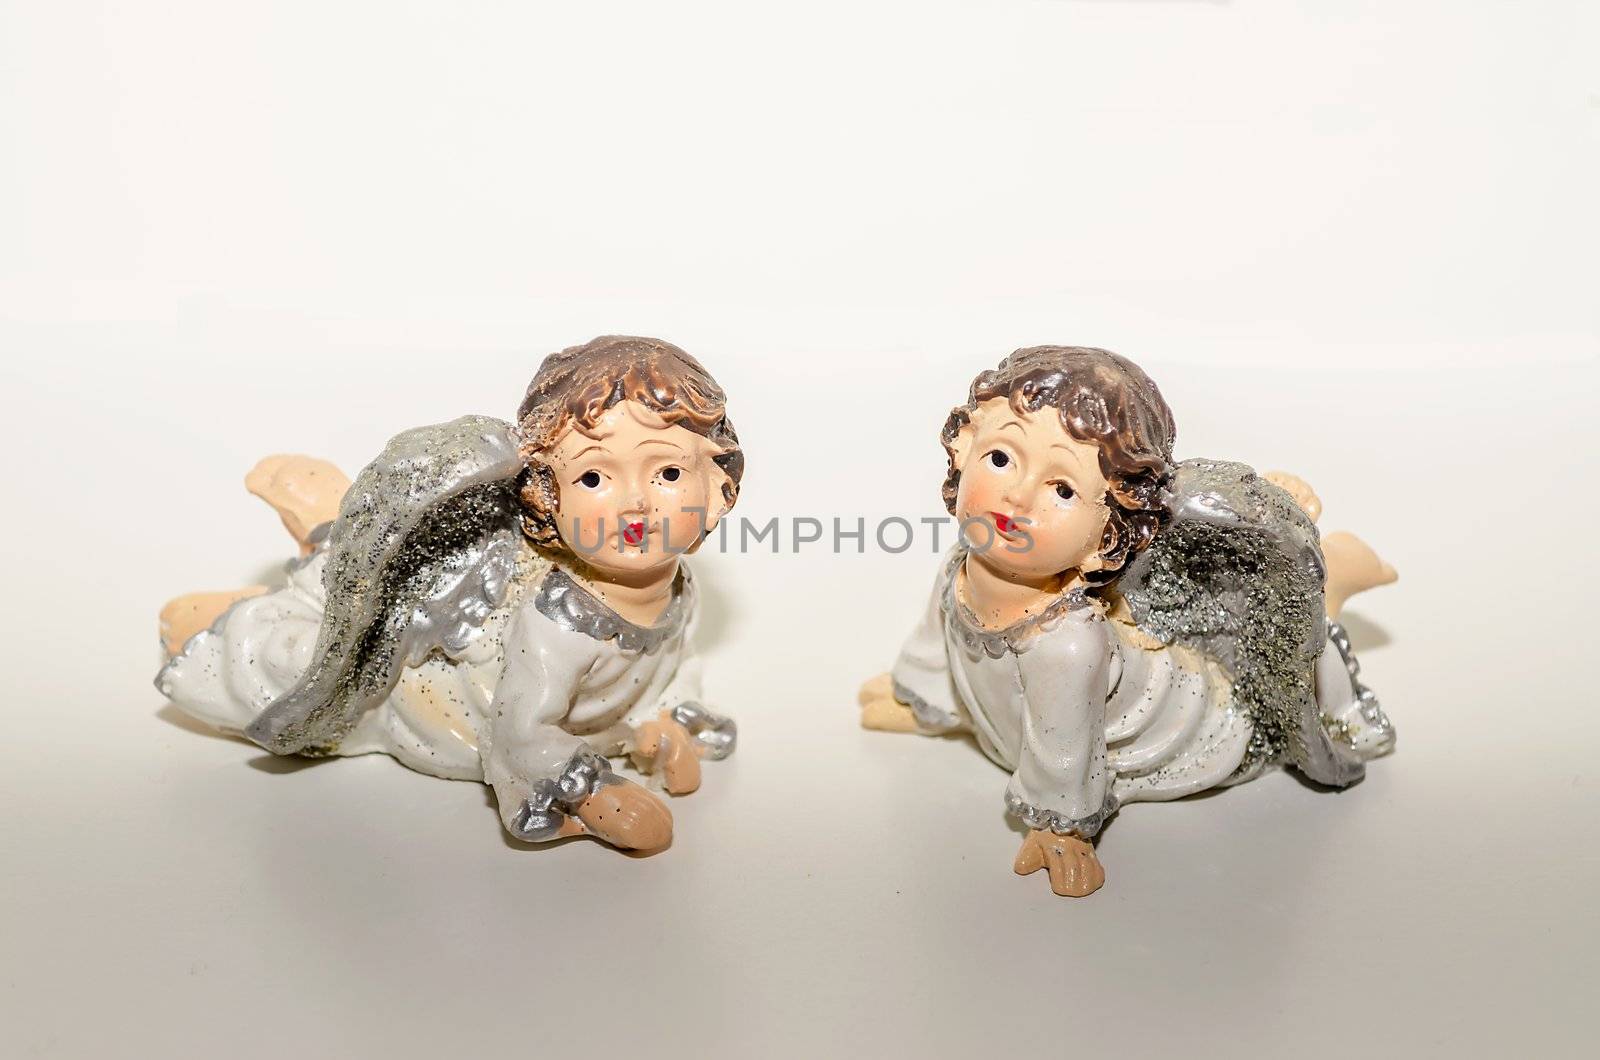 Ceramic Statuette of Two Cute Angels Close To Each Other, isolated on white